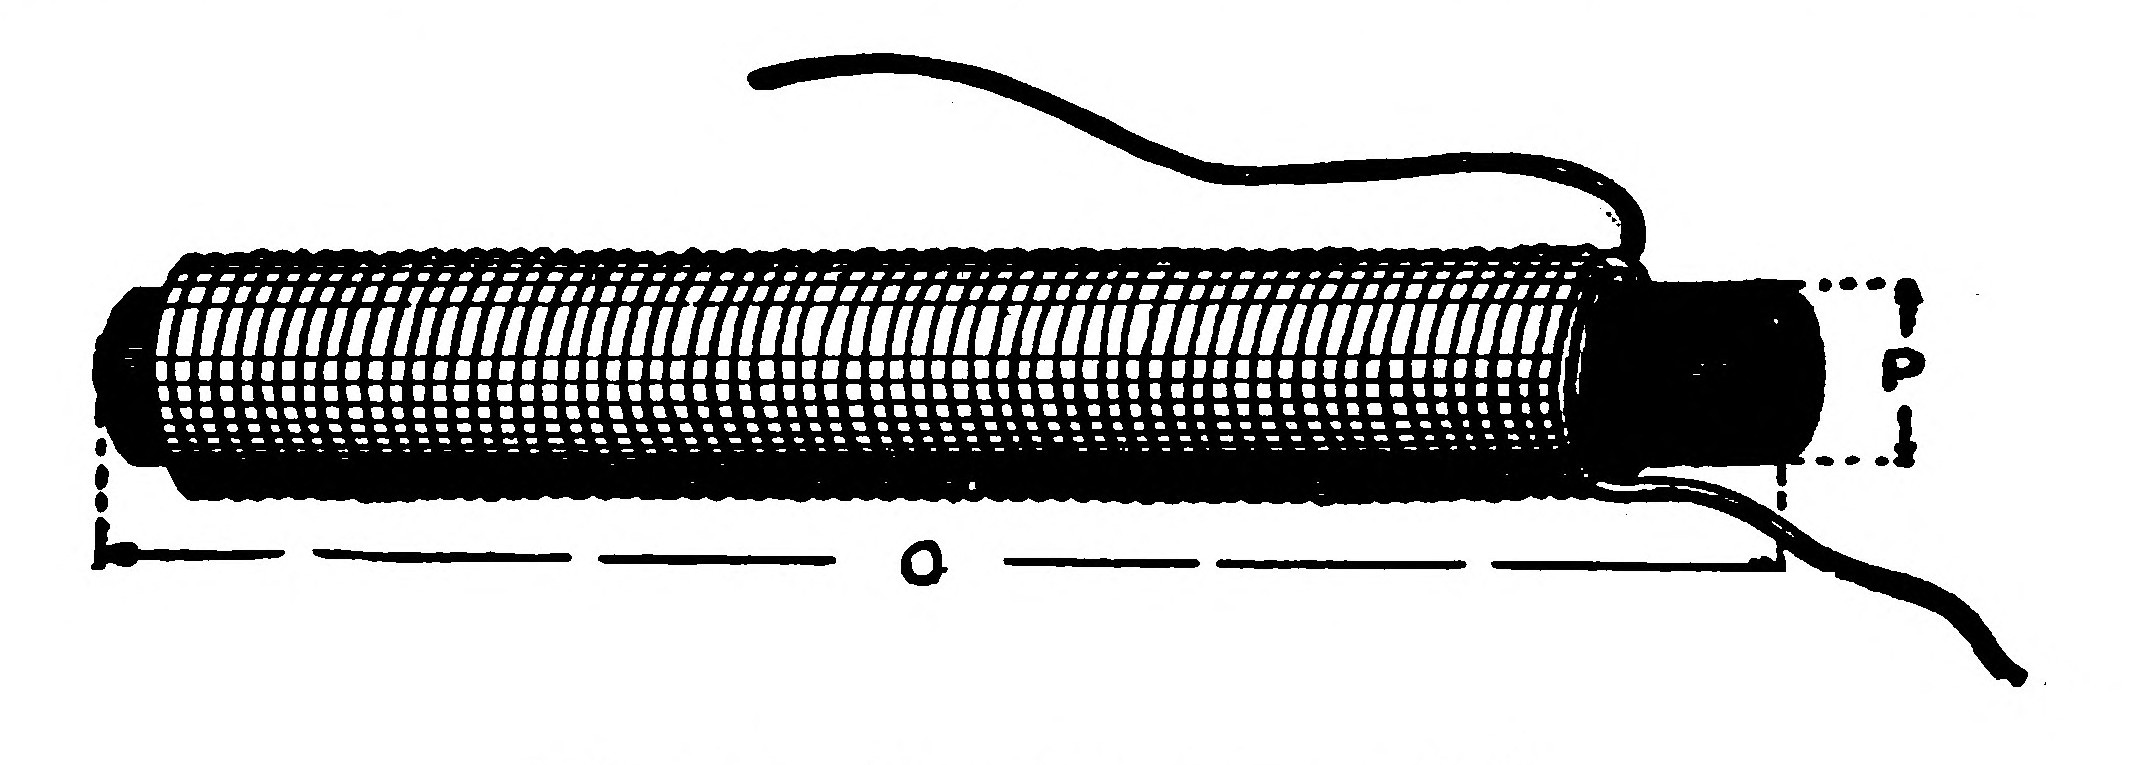 FIG. 110.—The Primary and Core.